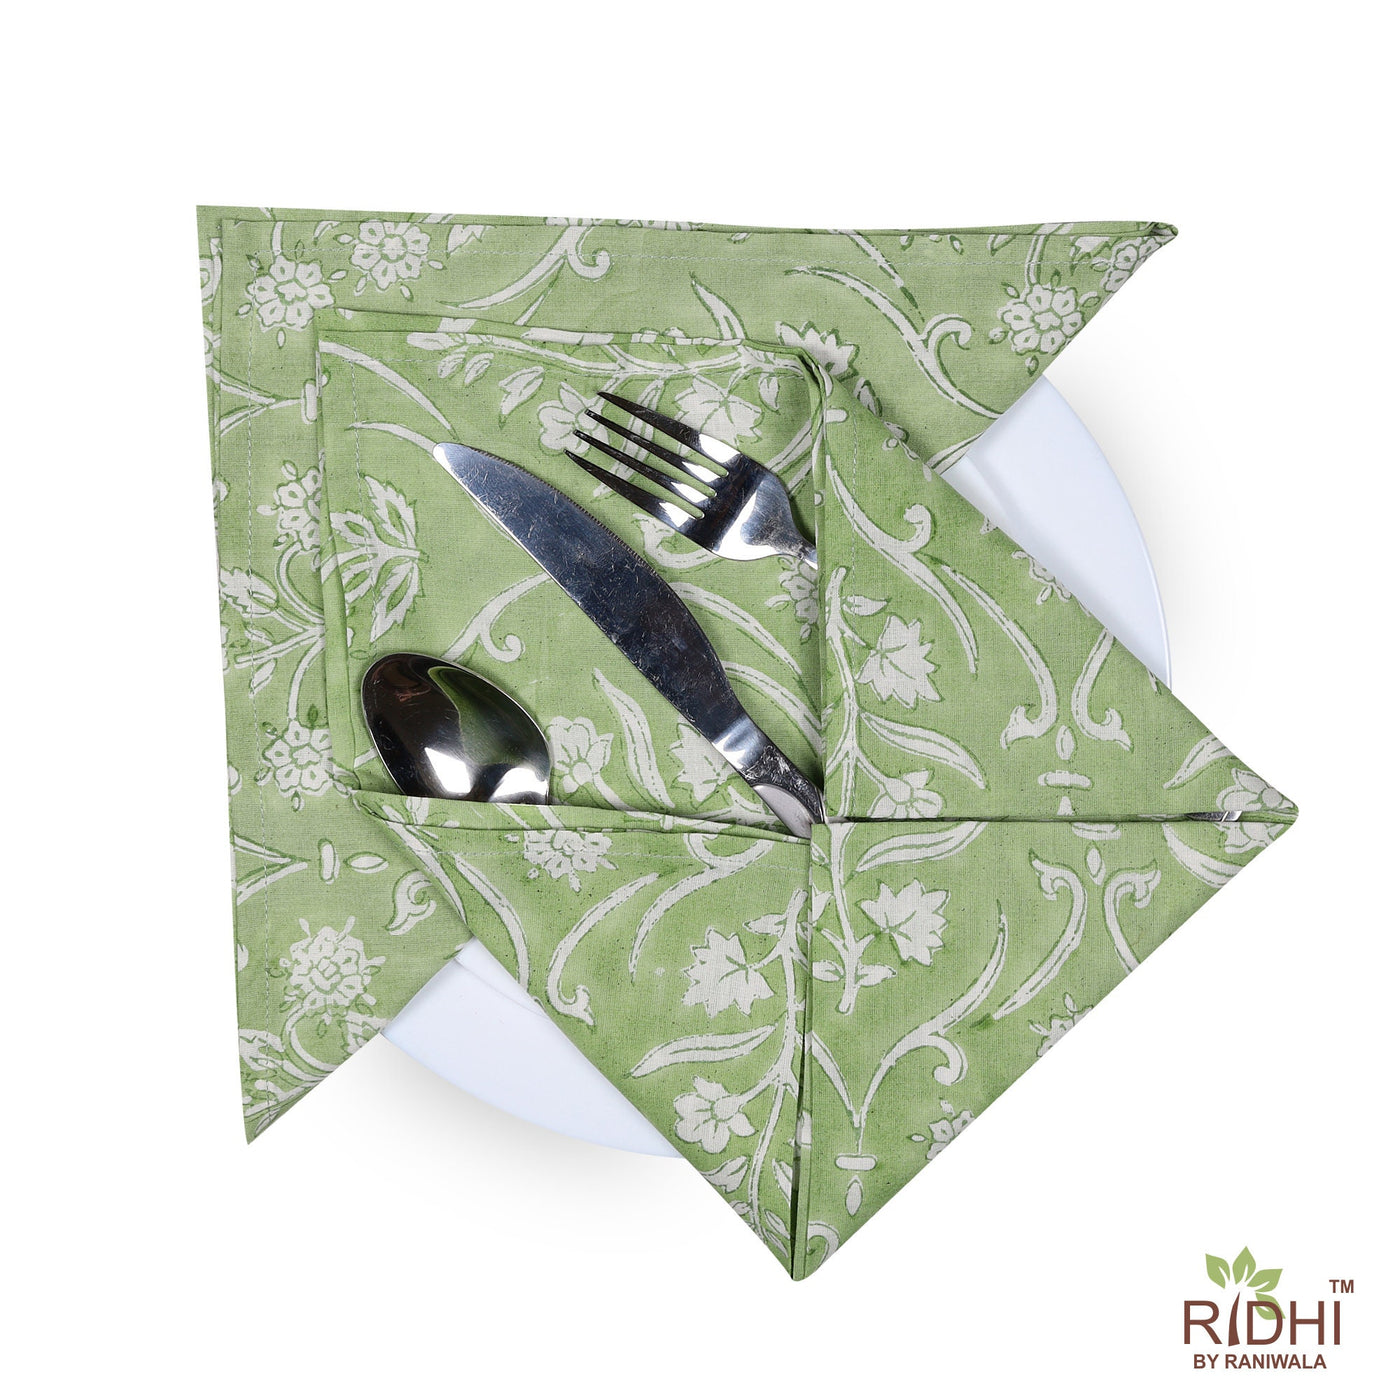 Sage Green and White Indian Floral Hand Block Floral Printed Pure Cotton Cloth Napkins, 18x18"- Cocktail Napkins, 20x20"- Dinner Napkins